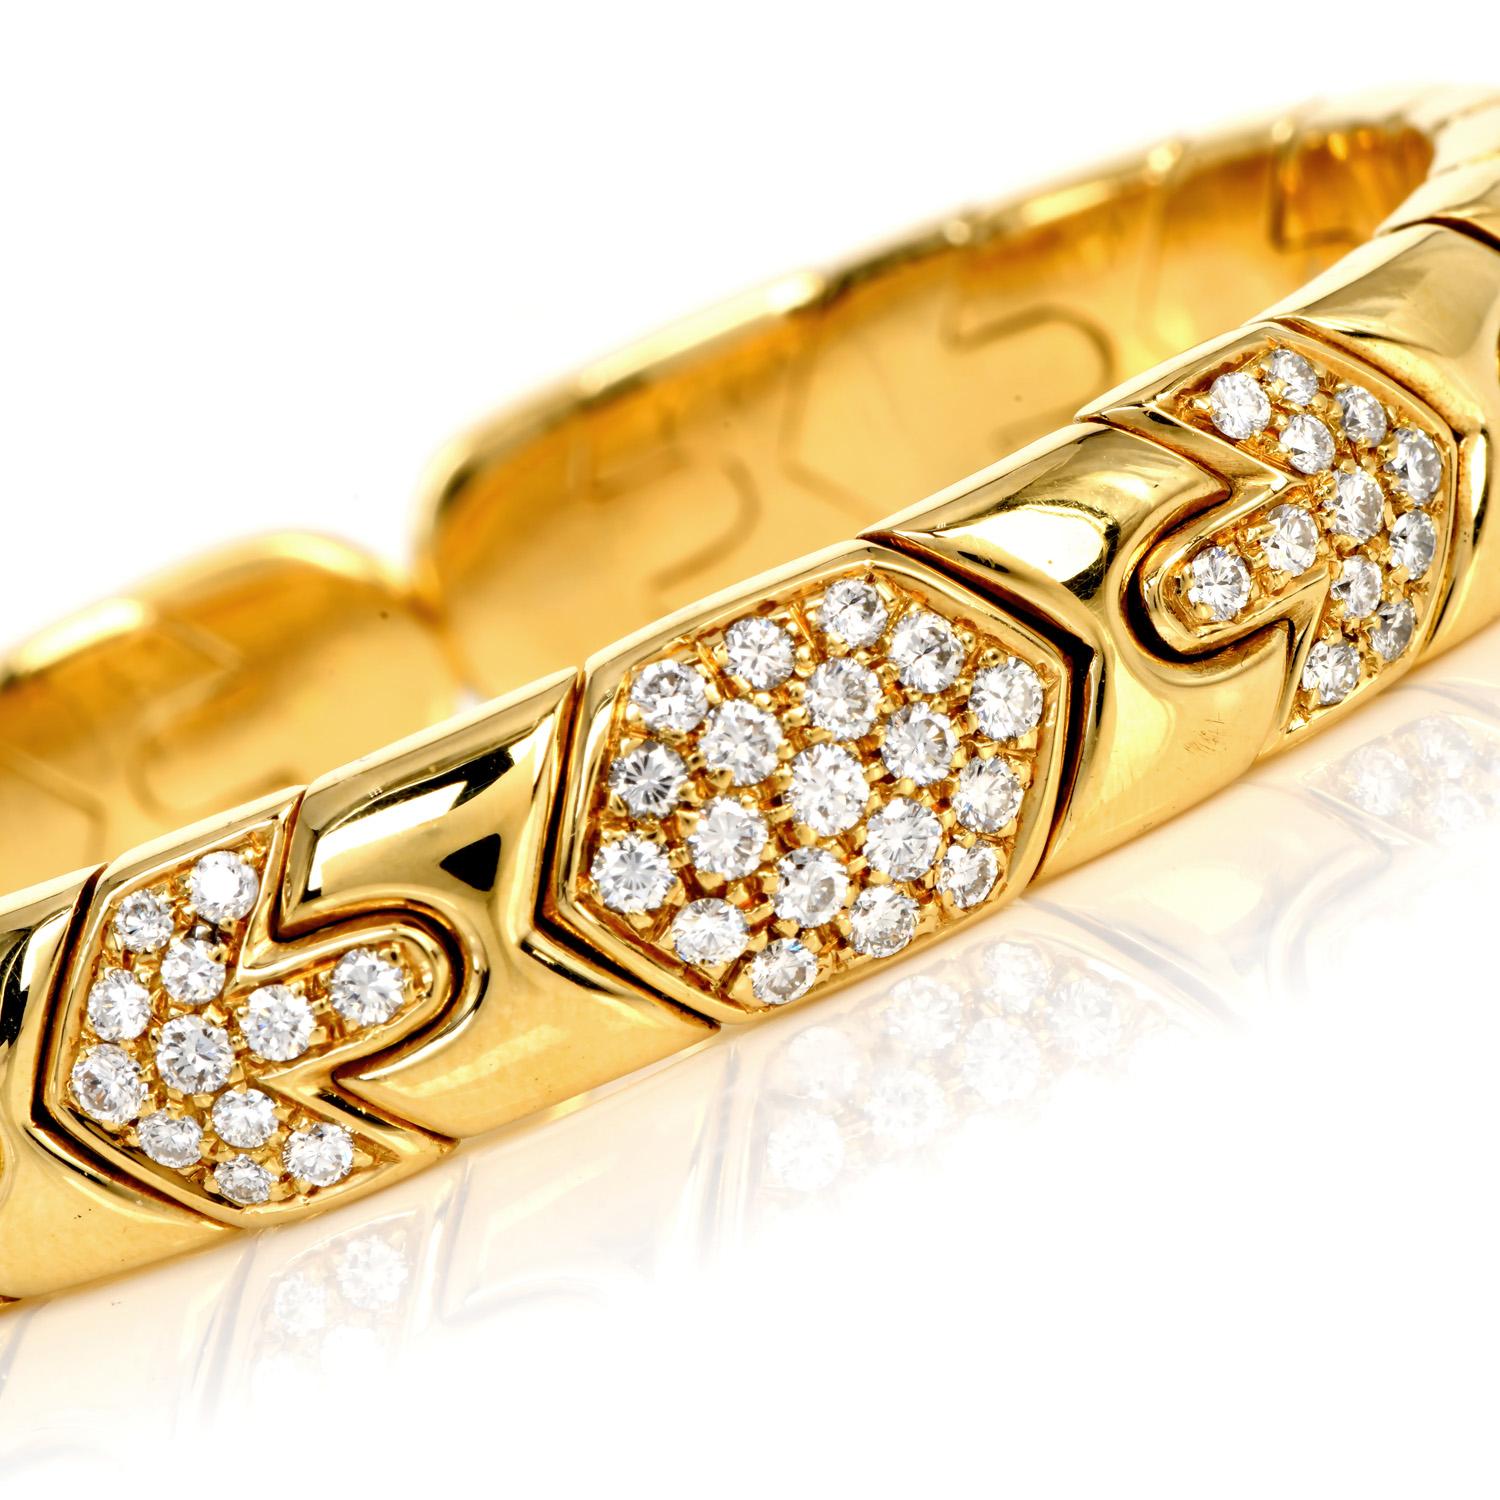 A top Quality masterpiece from the Bvlgari house.

This 1980's bangle flexible link cuff bracelet is crafted 18K yellow gold, weighing approximately 58.5 grams.

The center cluster style links features (45) Genuine dazzlings Diamonds round-cut,